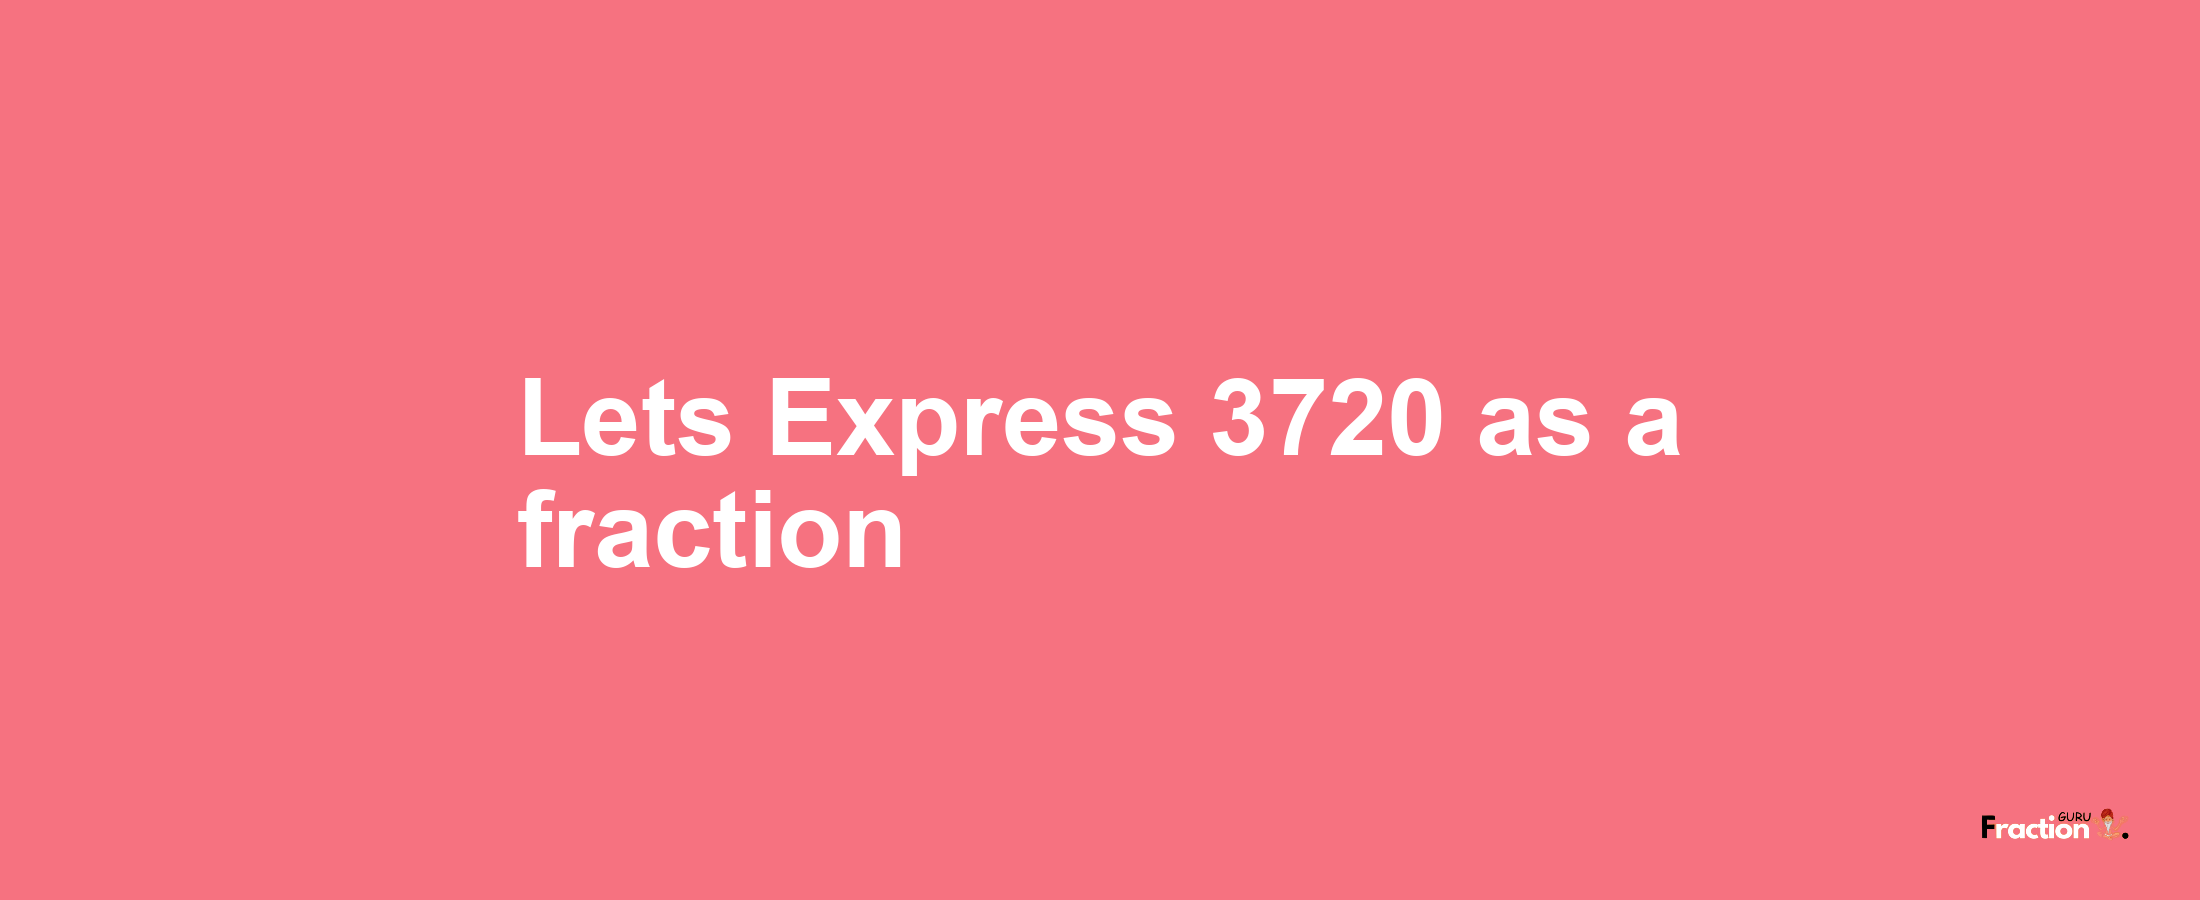 Lets Express 3720 as afraction